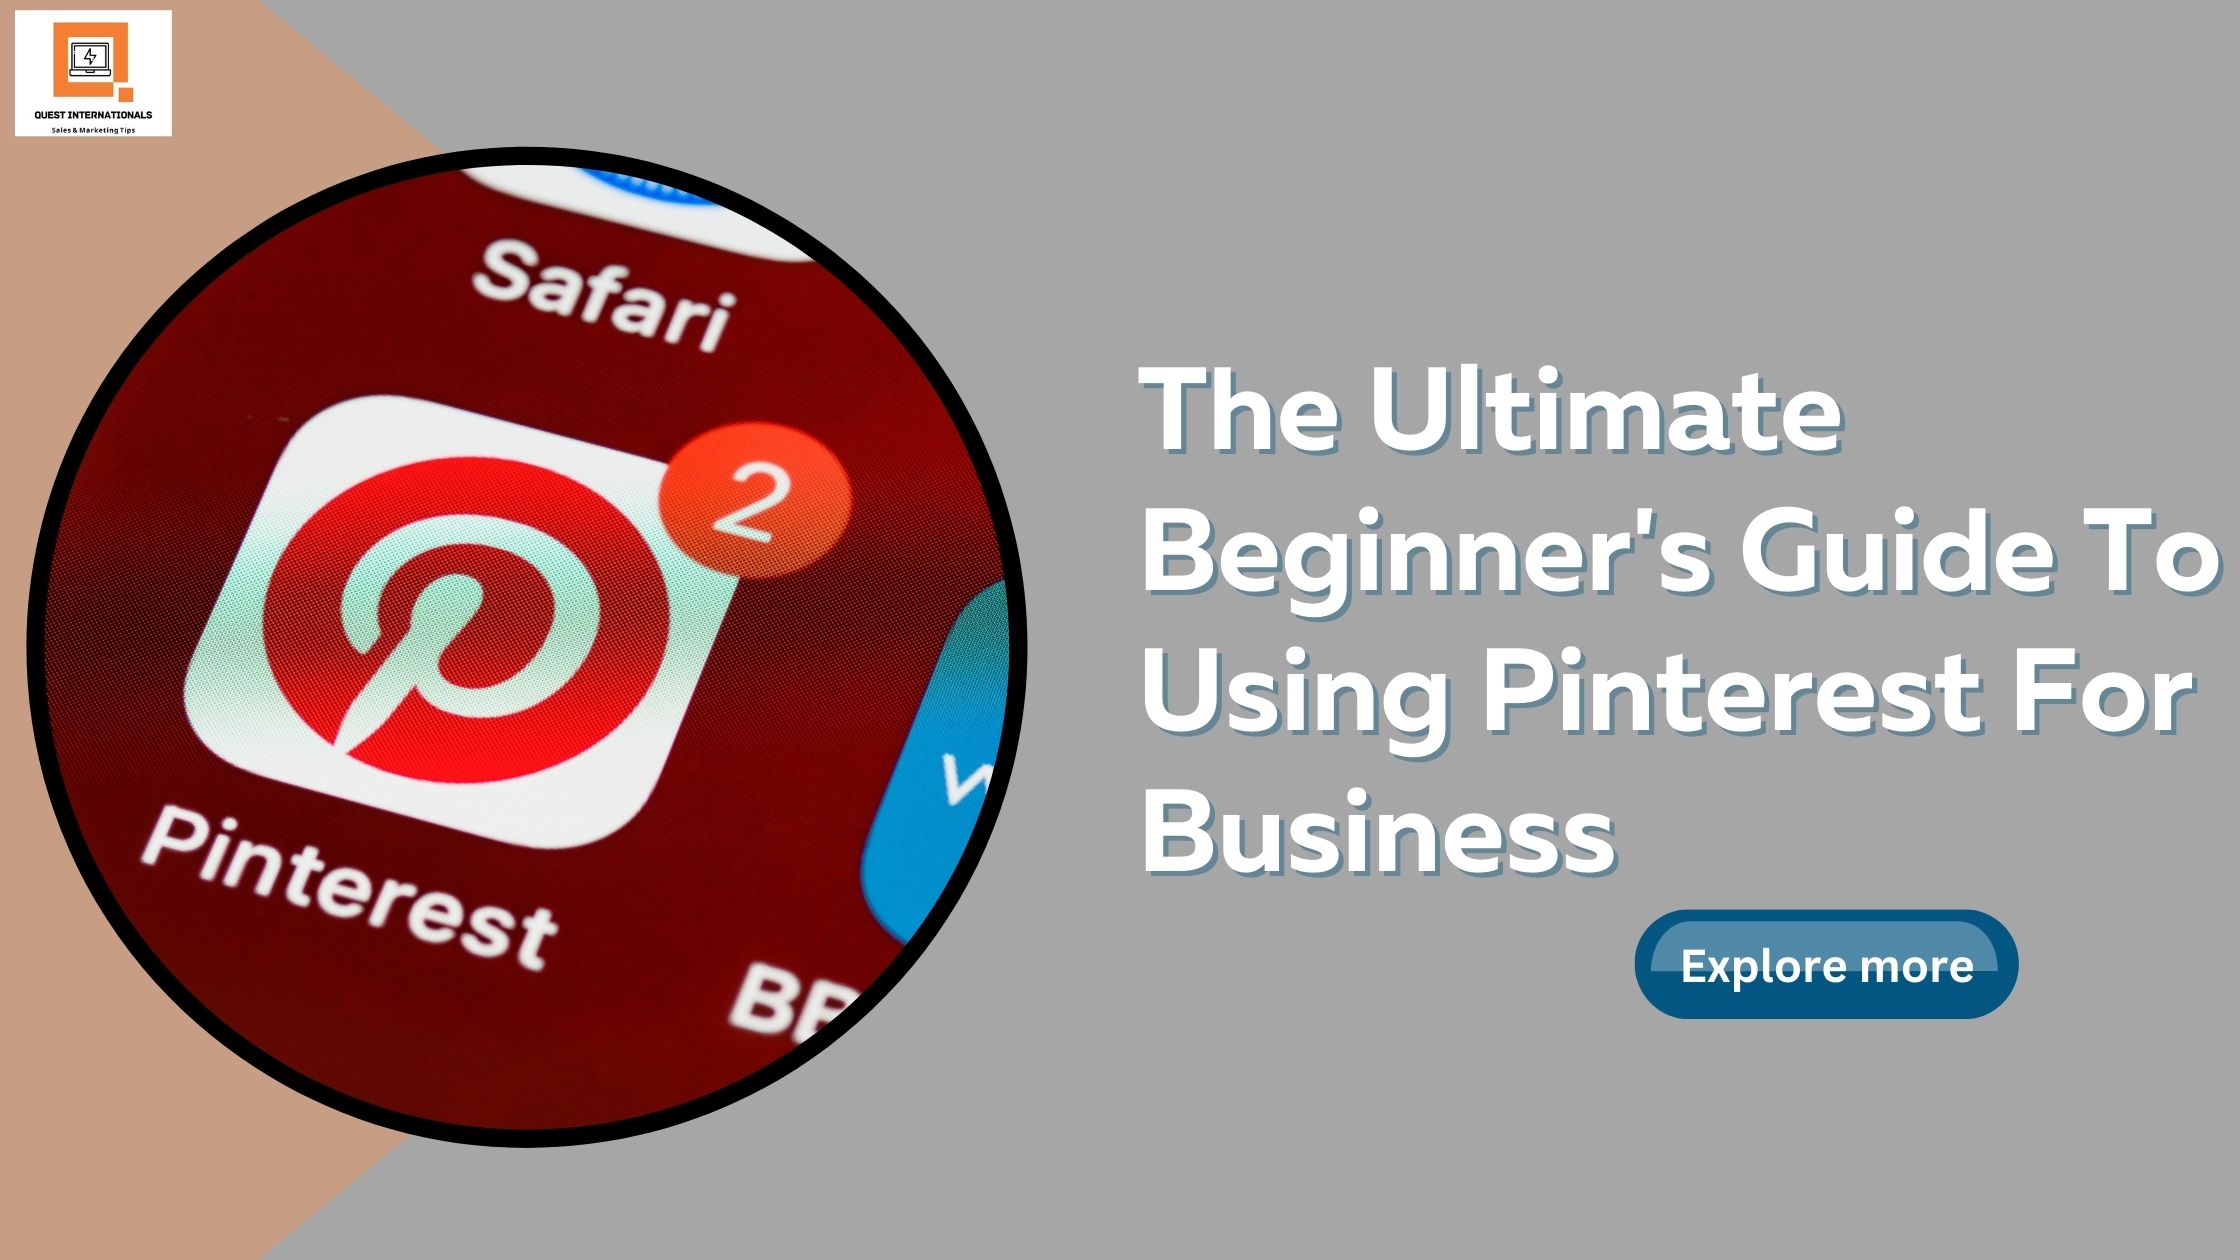 You are currently viewing The Ultimate Beginner’s Guide To Using Pinterest For Business